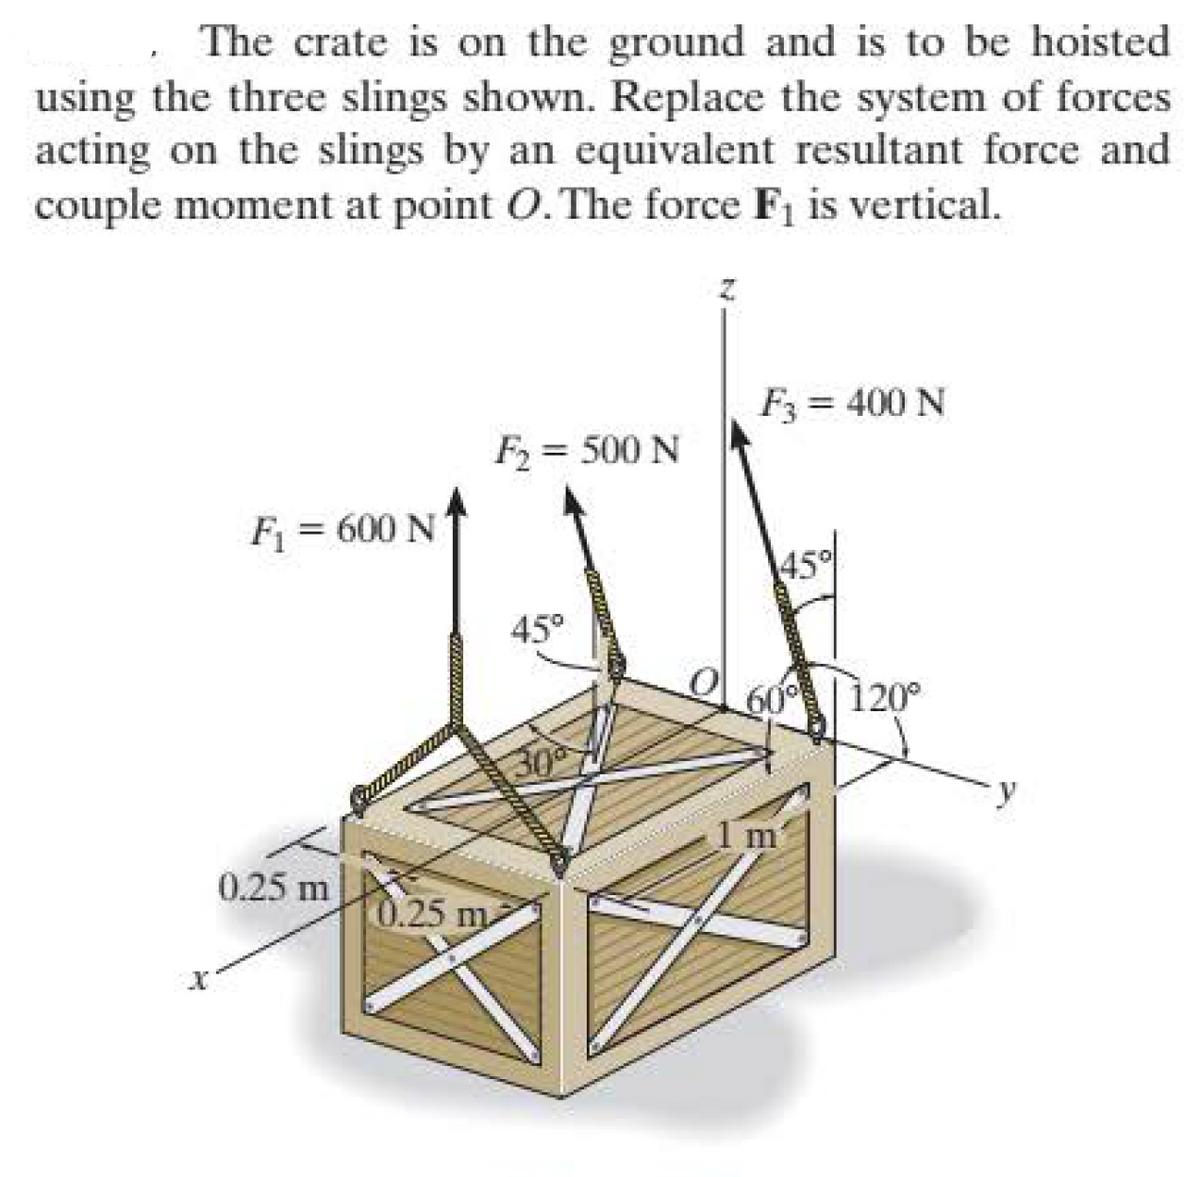 The crate is on the ground and is to be hoisted
using the three slings shown. Replace the system of forces
acting on the slings by an equivalent resultant force and
couple moment at point O. The force F₁ is vertical.
F3 = 400 N
F₂ = 500 N
F₁ = 600 N
45°
45°
0
60°
120°
1 m
0.25 m
0.25 m
y